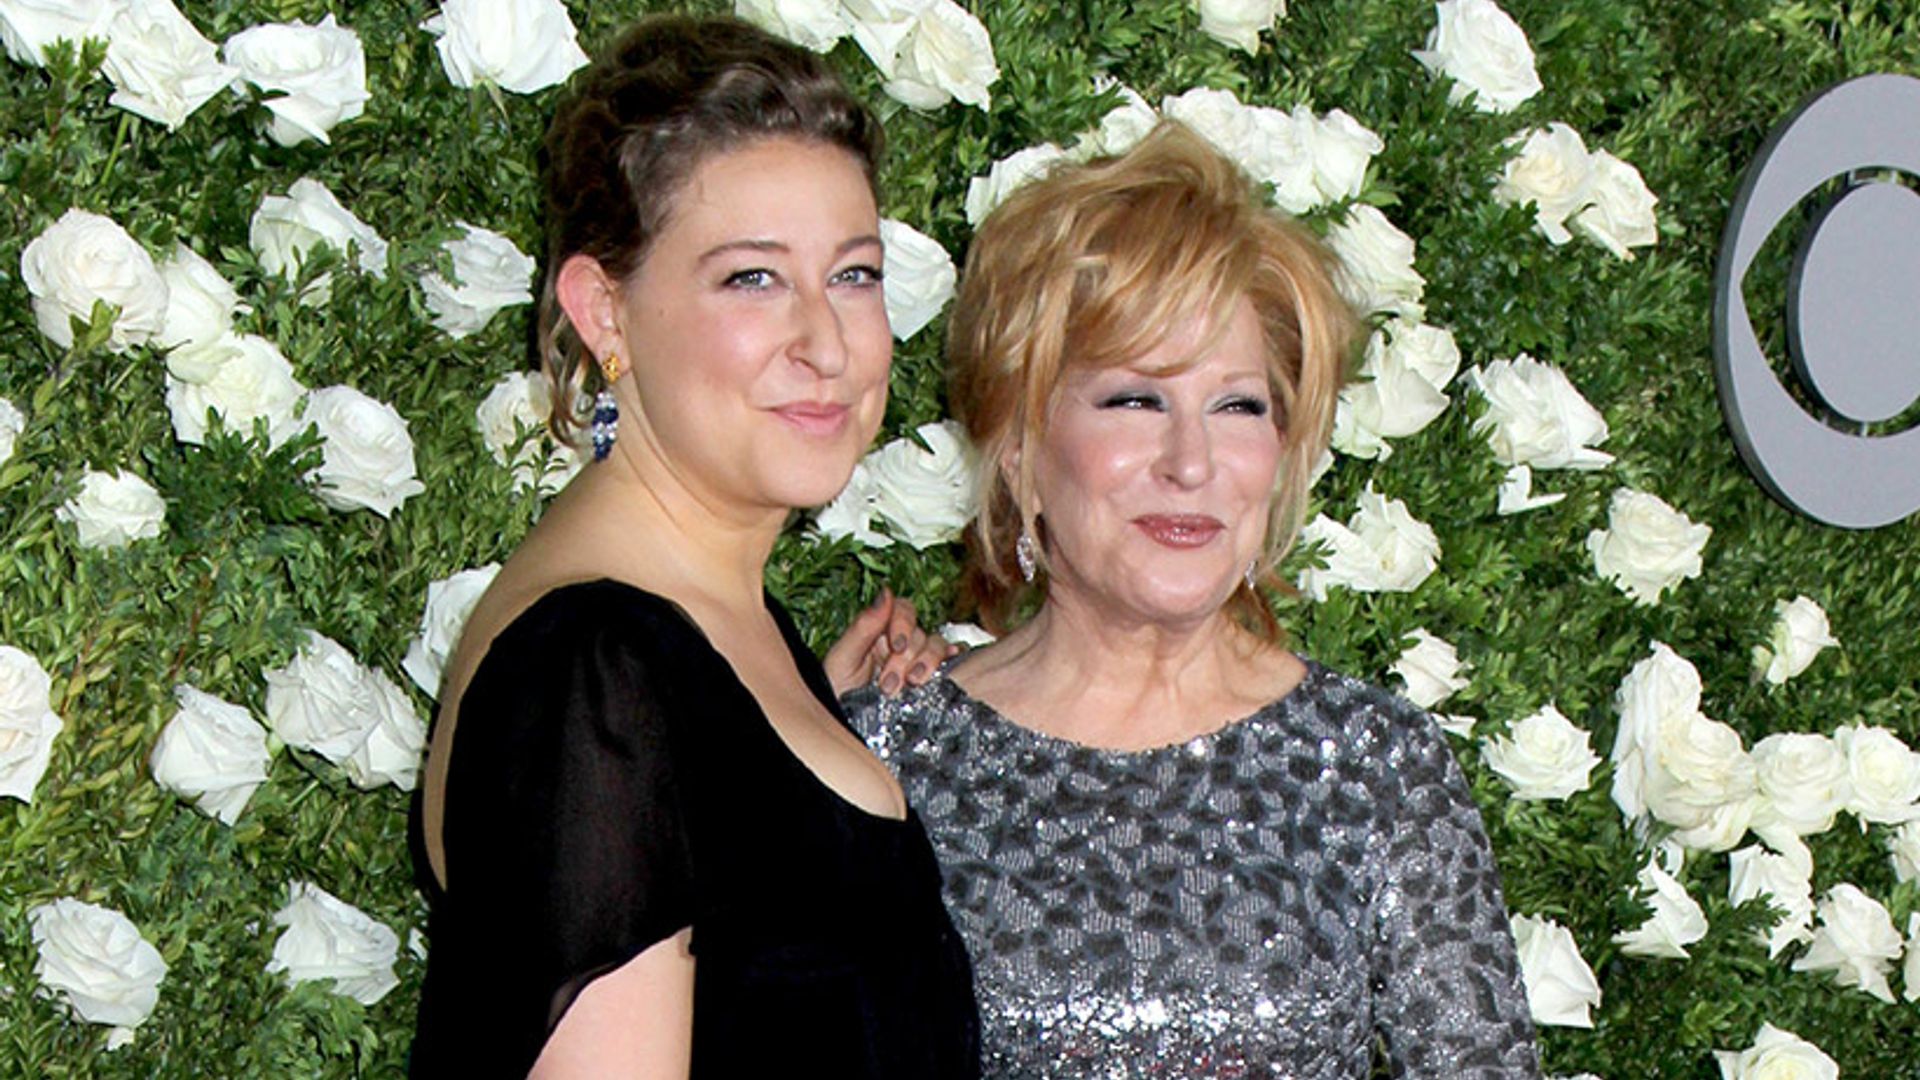 Bette Midler makes rare appearance with her lookalike daughter